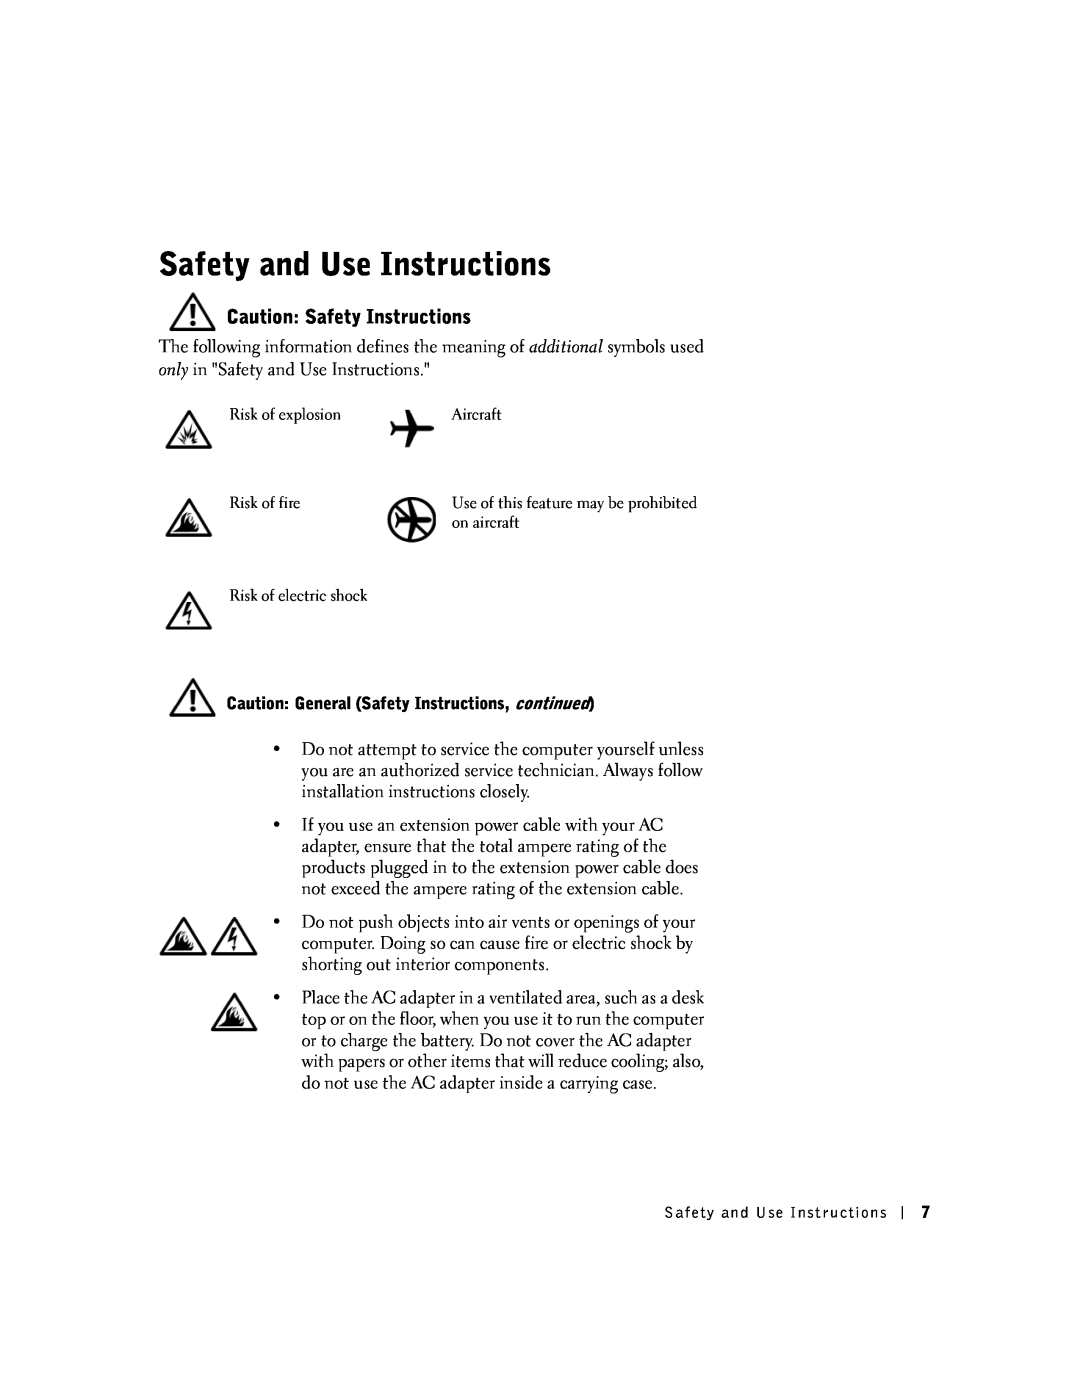 Dell 100N owner manual Safety and Use Instructions, Caution Safety Instructions 